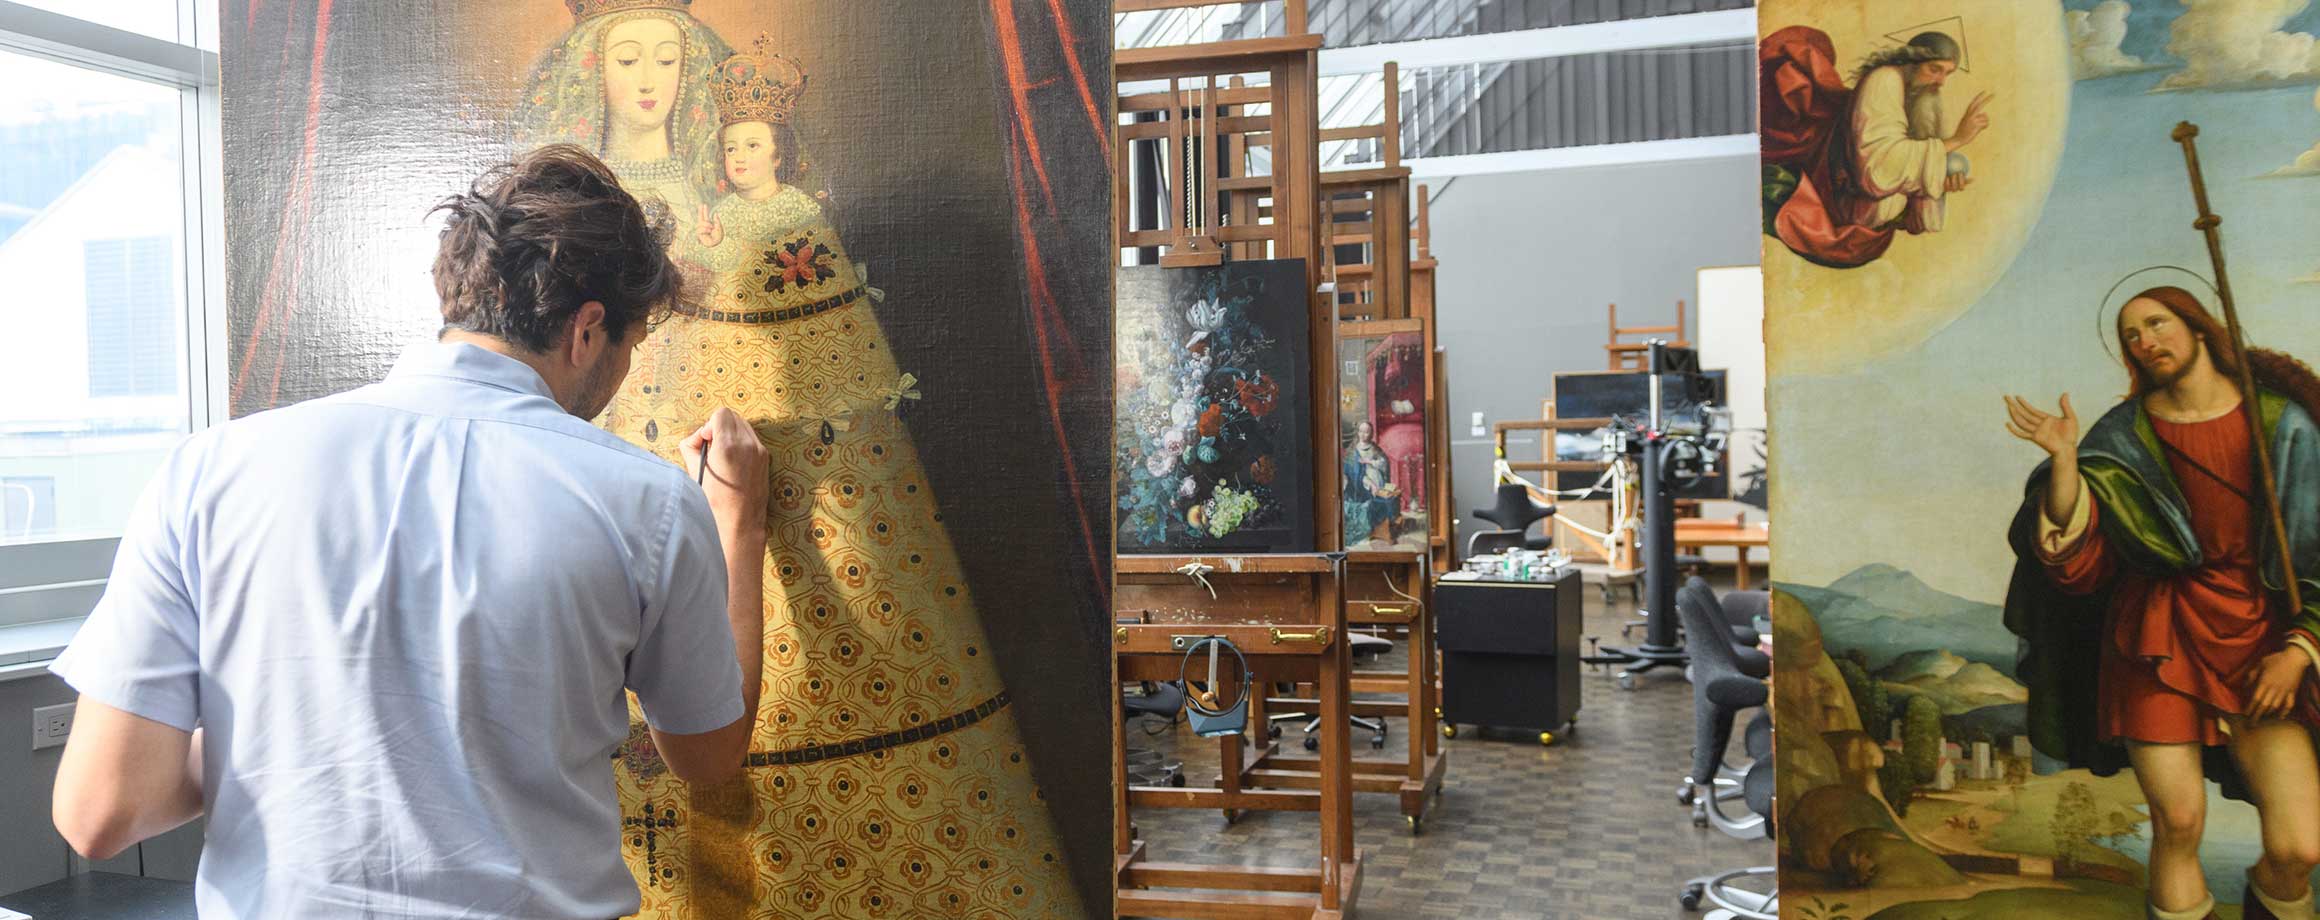 Paintings conservation fellow working on a royal portrait painting